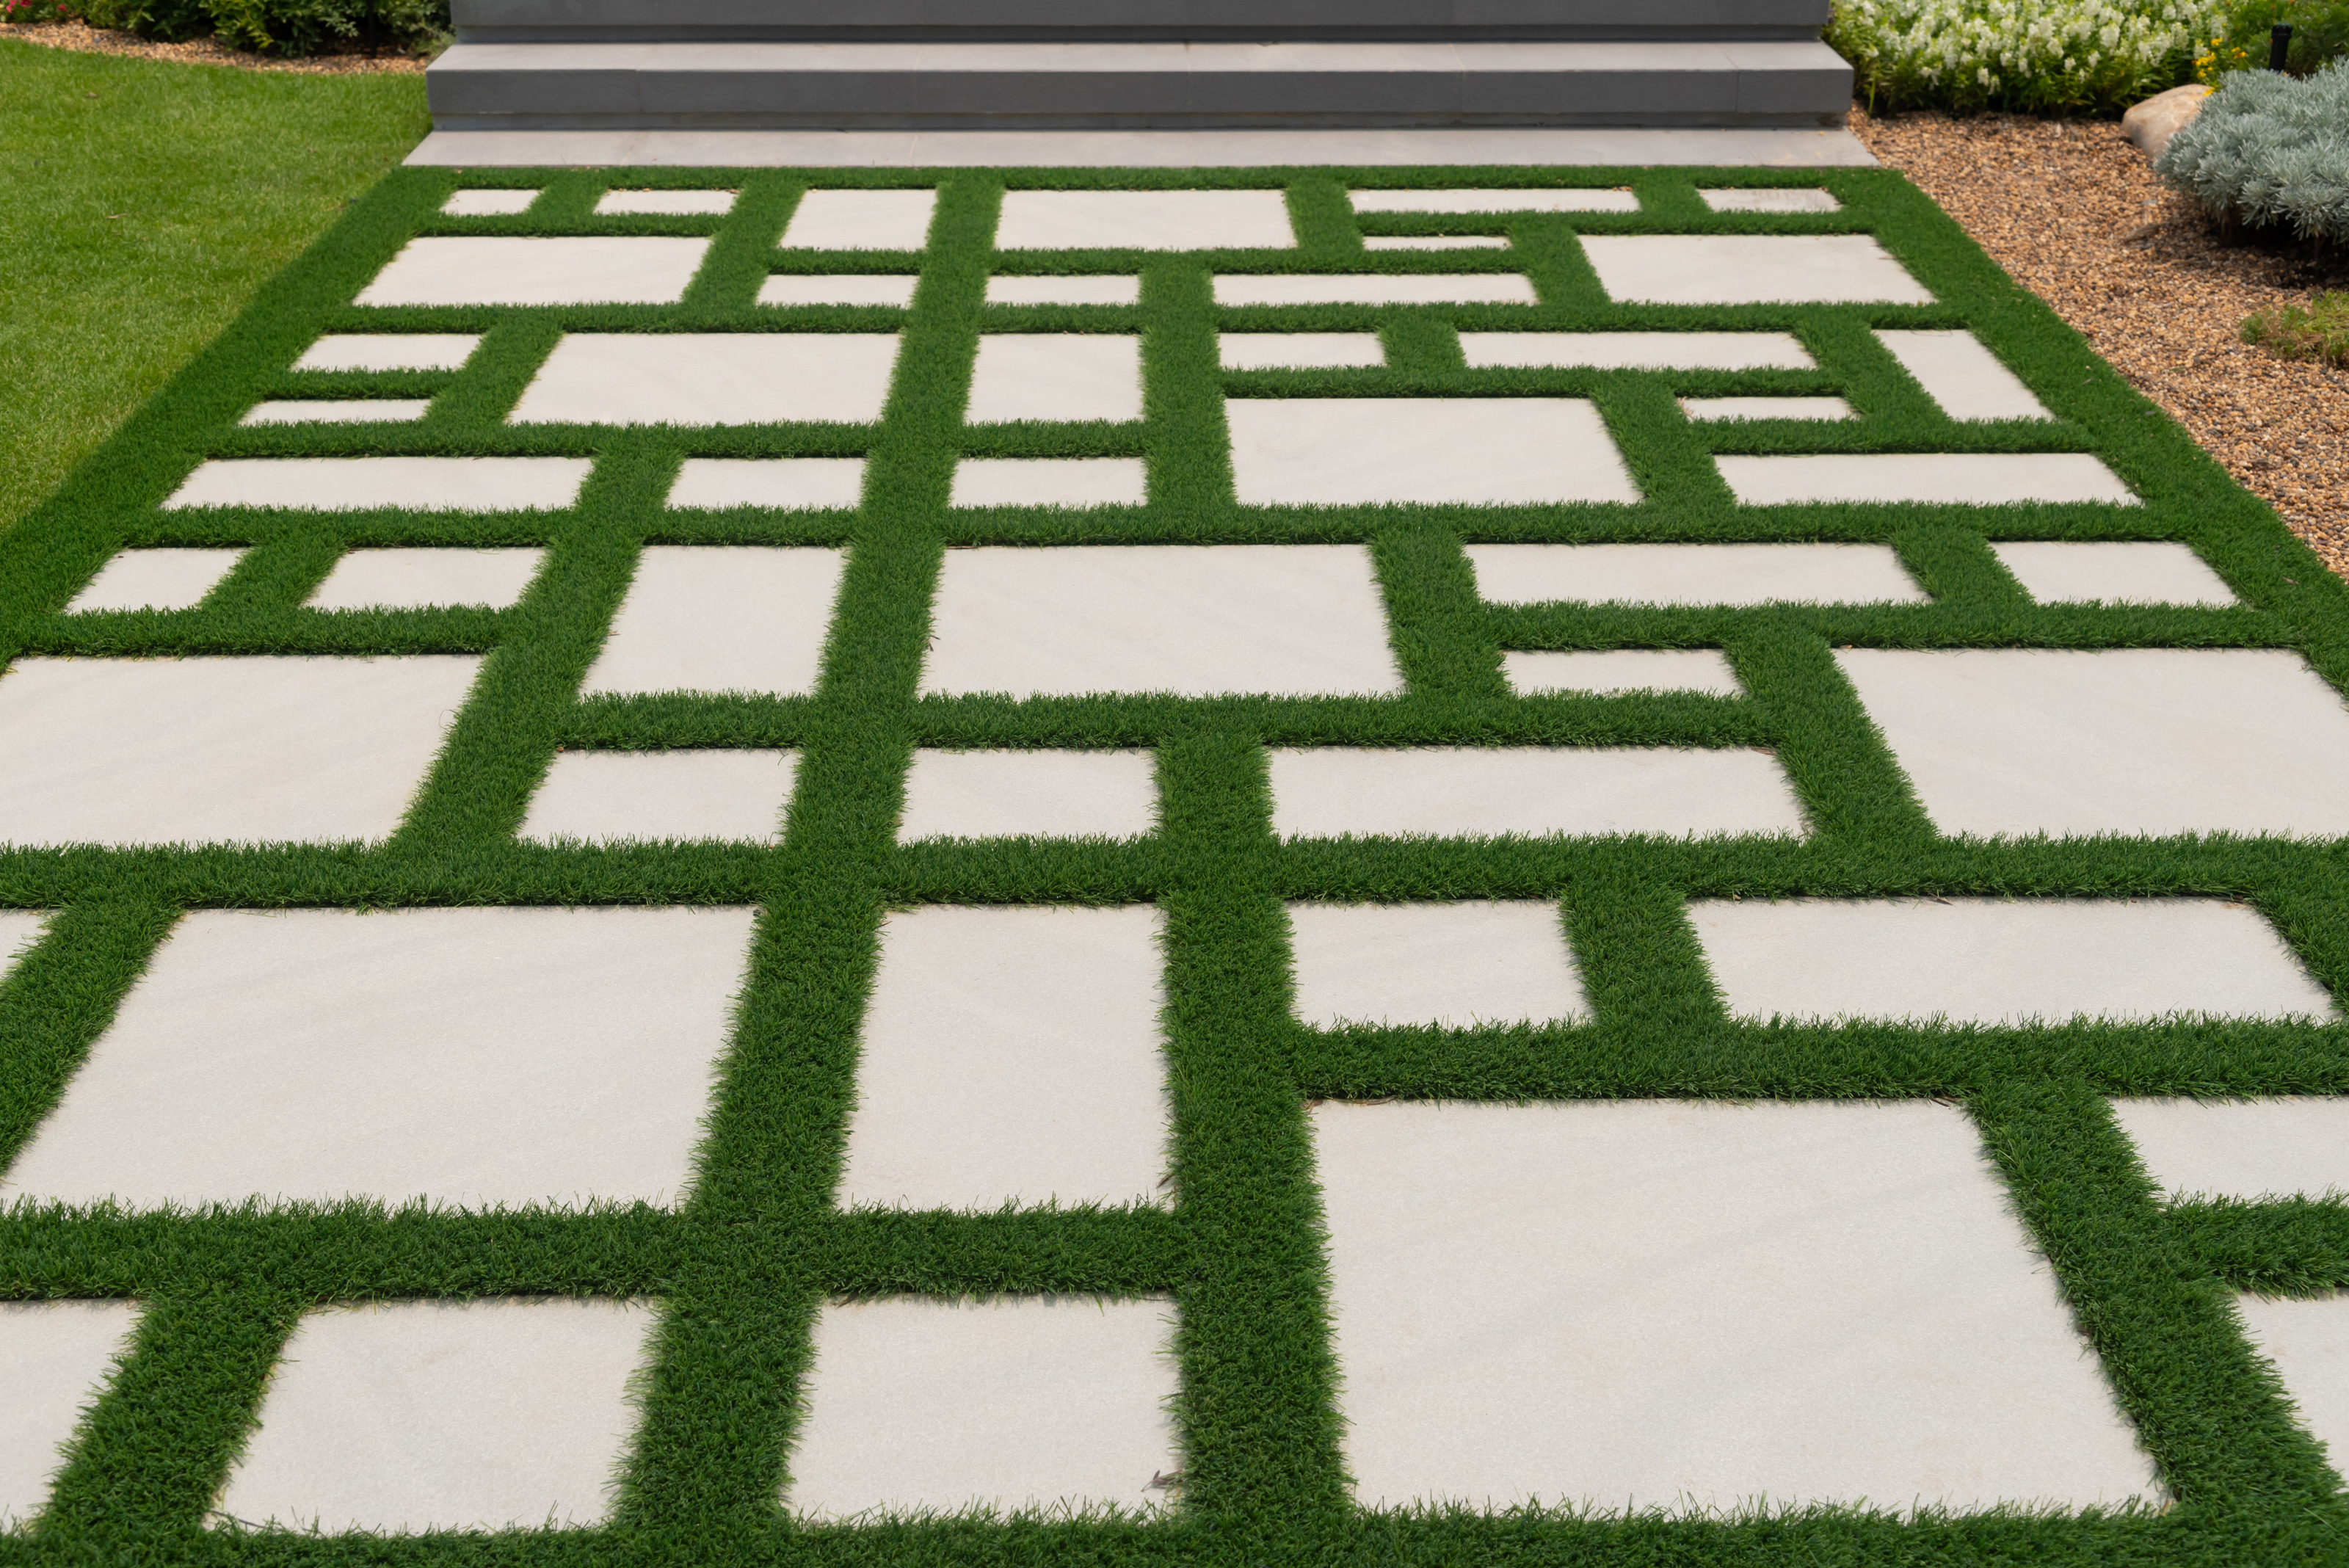 Texture or pattern of paving walkway with green grass.